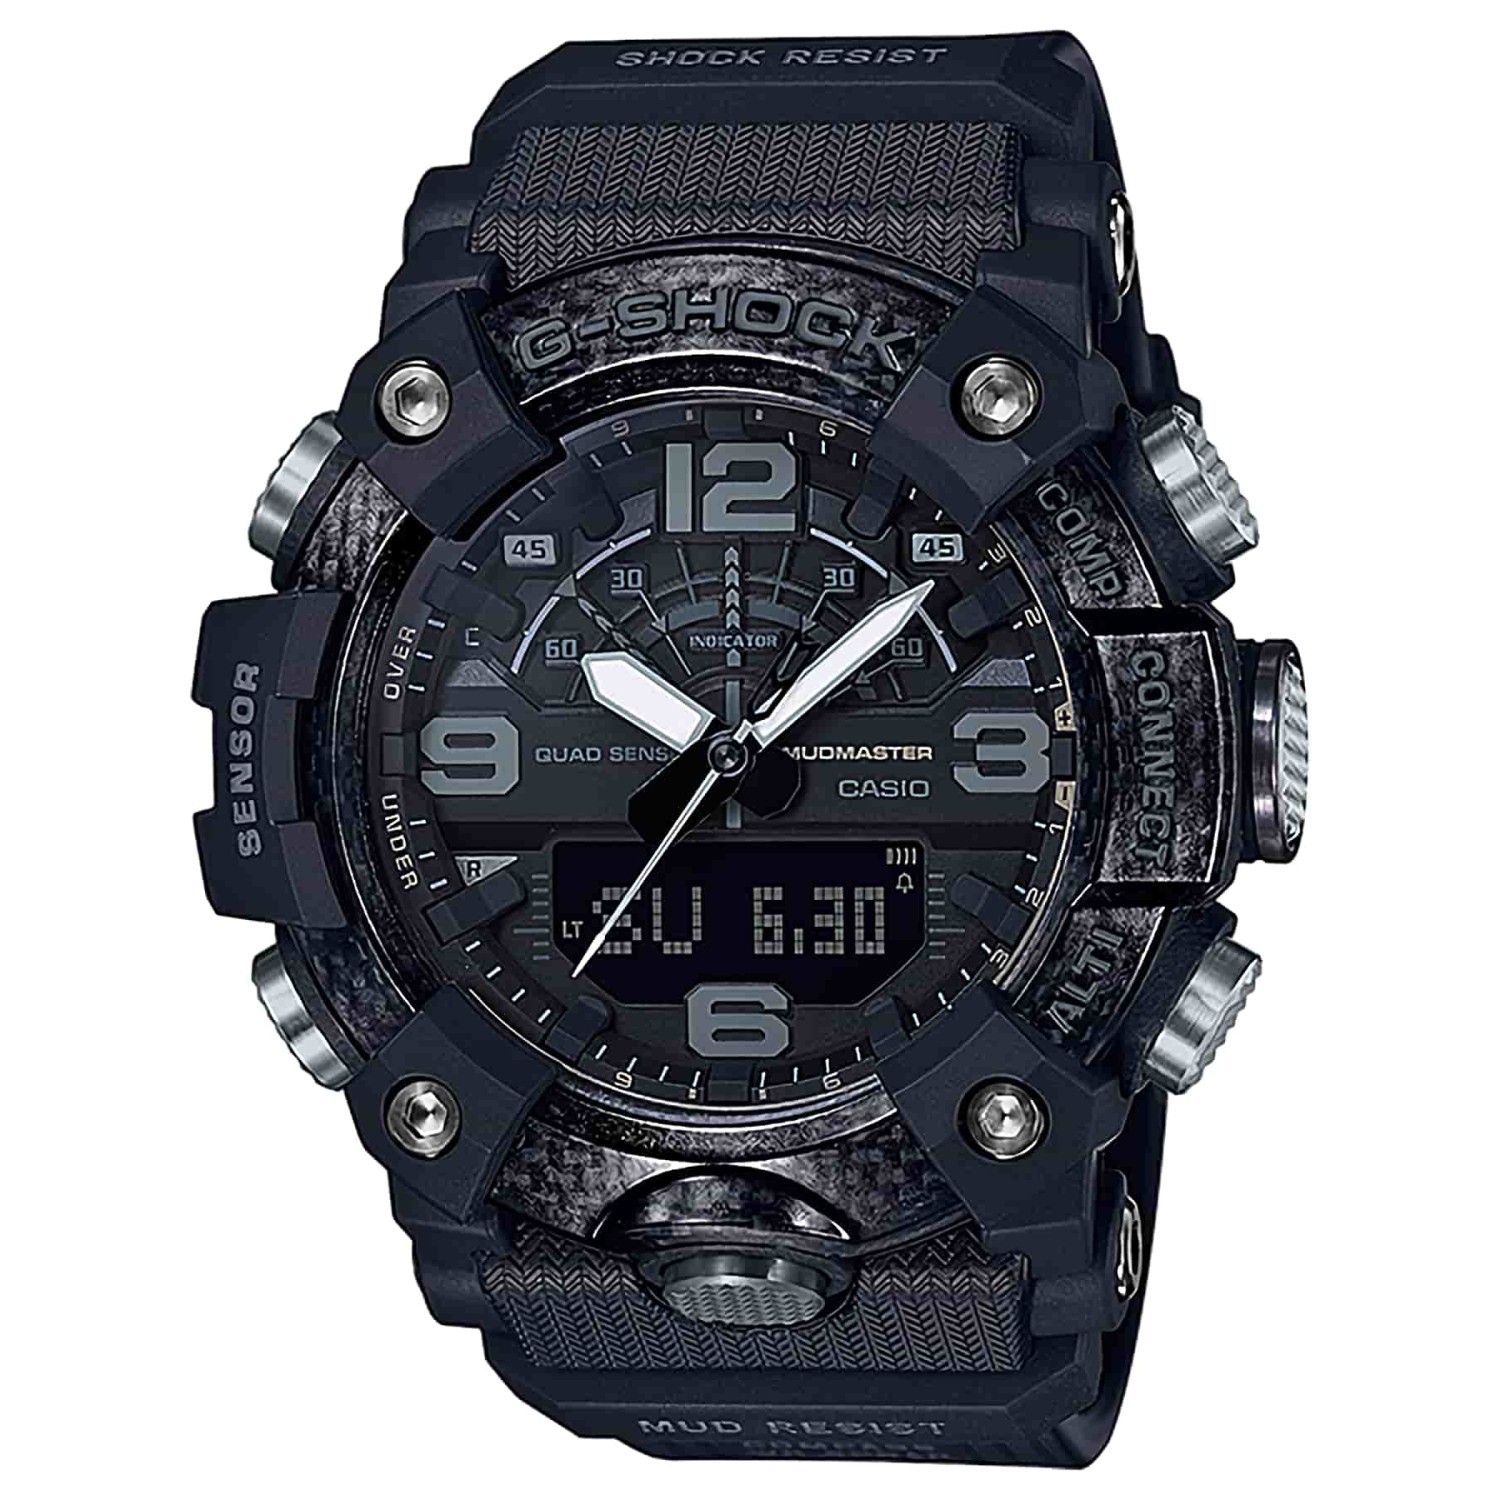 GGB100-1B G-SHOCK Mudmaster Master of G Blackout. This is the latest model from MASTER OF G, the G-SHOCK series of watches designed and engineered for use by those whose work takes them into extreme environments scattered with rubble, dirt, and debris. Th